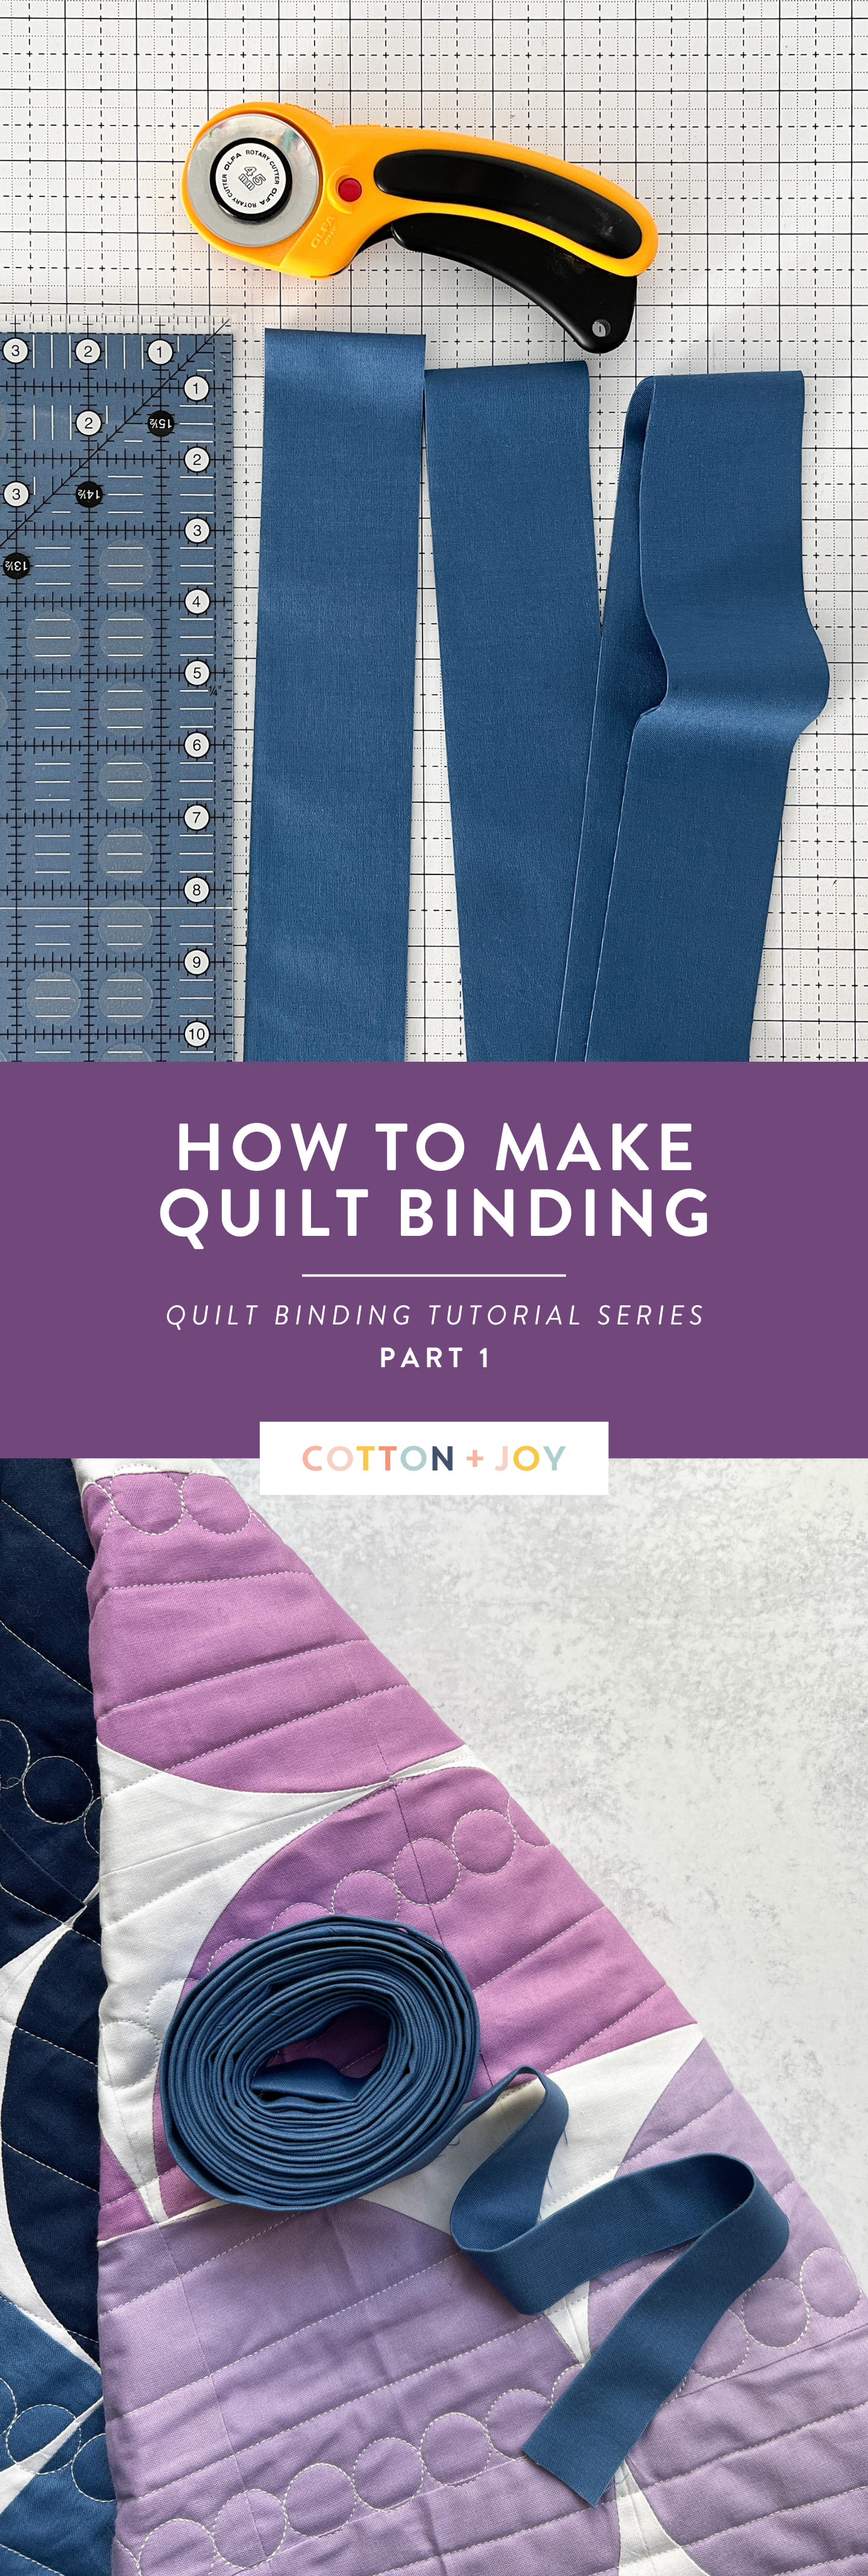 Learn how to make quilt binding with this beginner-friendly binding tutorial from Cotton and Joy.